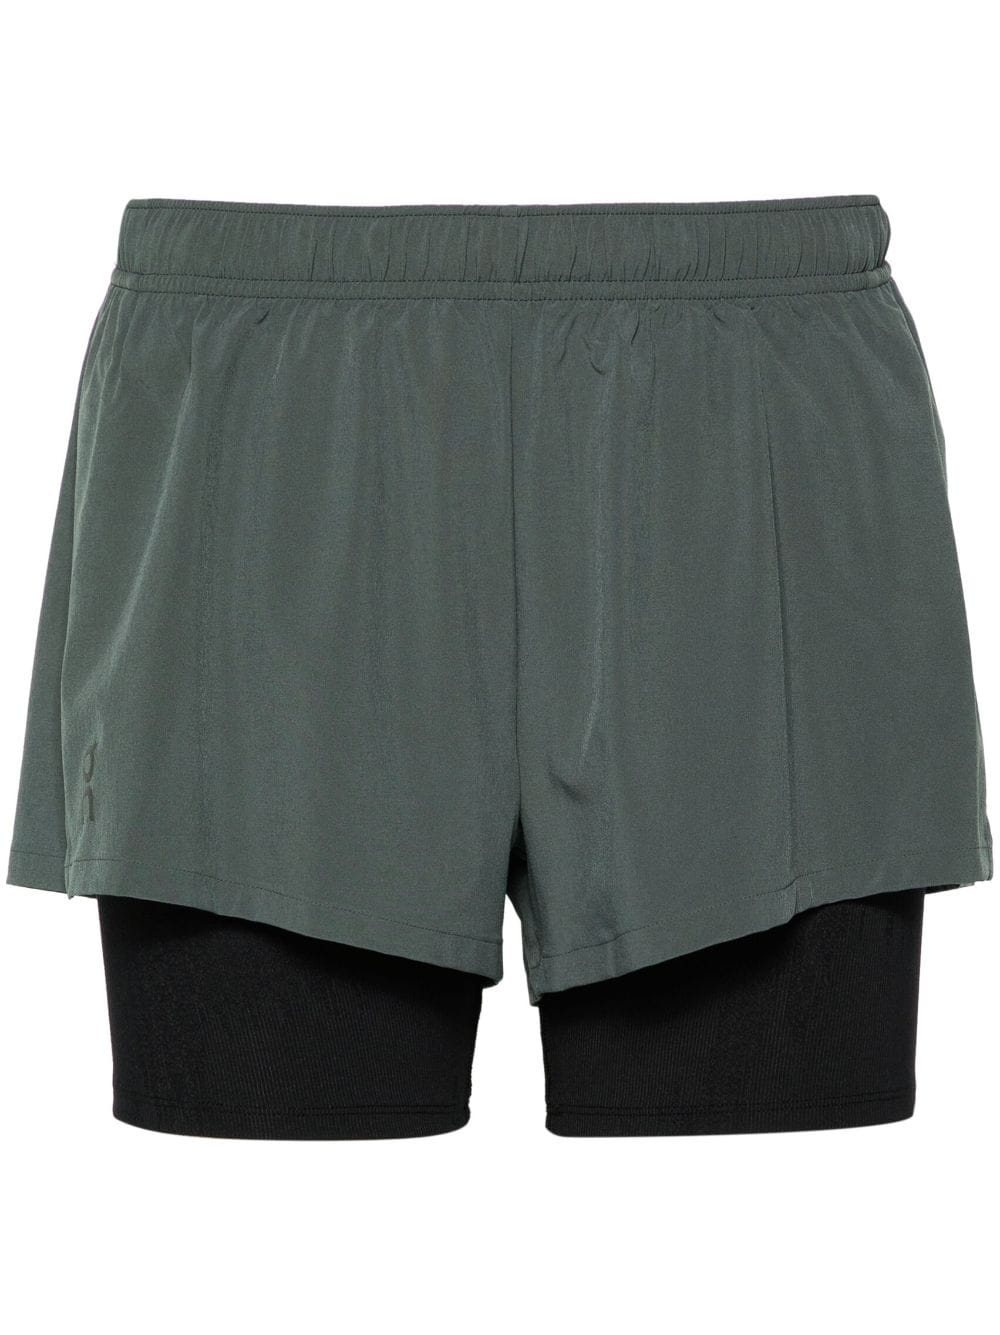 Energy Pace running shorts